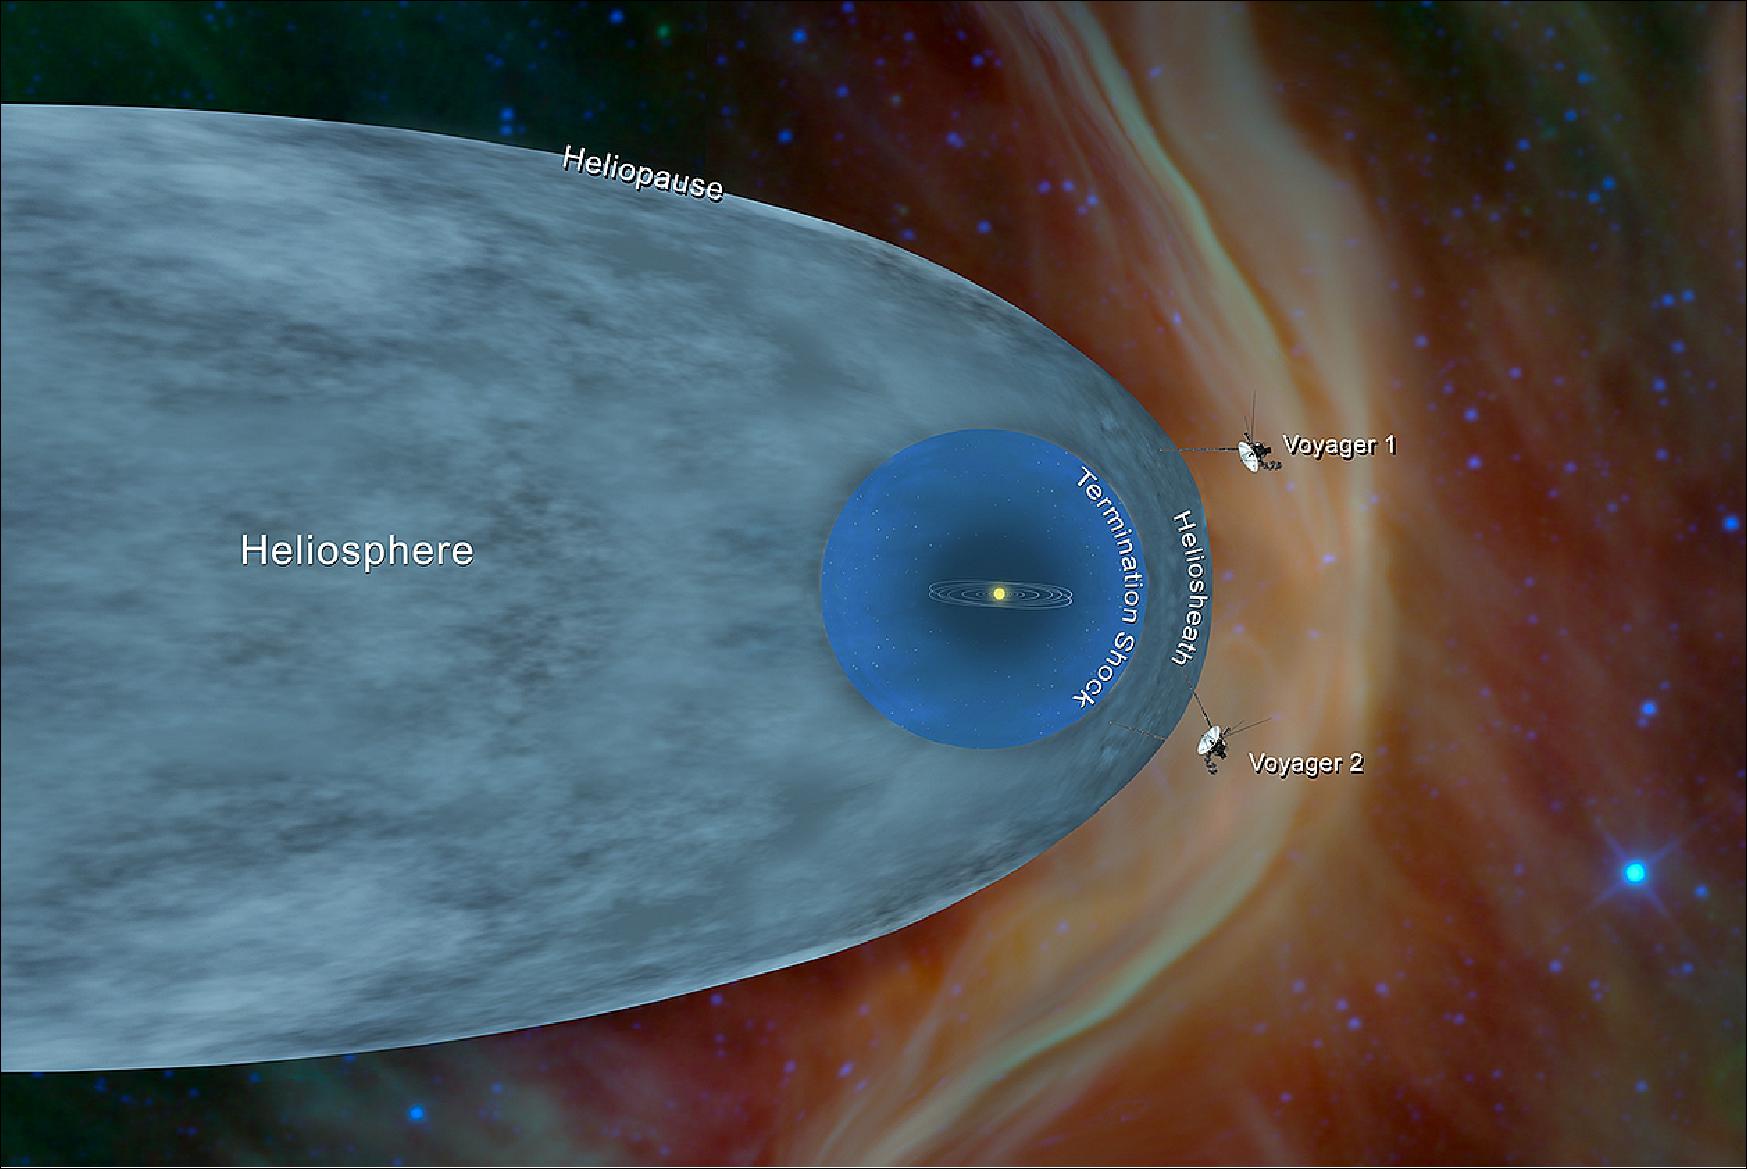 Figure 20: This illustration shows the position of NASA's Voyager 1 and Voyager 2 probes, outside of the heliosphere, a protective bubble created by the Sun that extends well past the orbit of Pluto. Voyager 1 crossed the heliopause, or the edge of the heliosphere, in August 2012. Heading in a different direction, Voyager 2 crossed another part of the heliopause in November 2018 (image credit: NASA/JPL-Caltech)